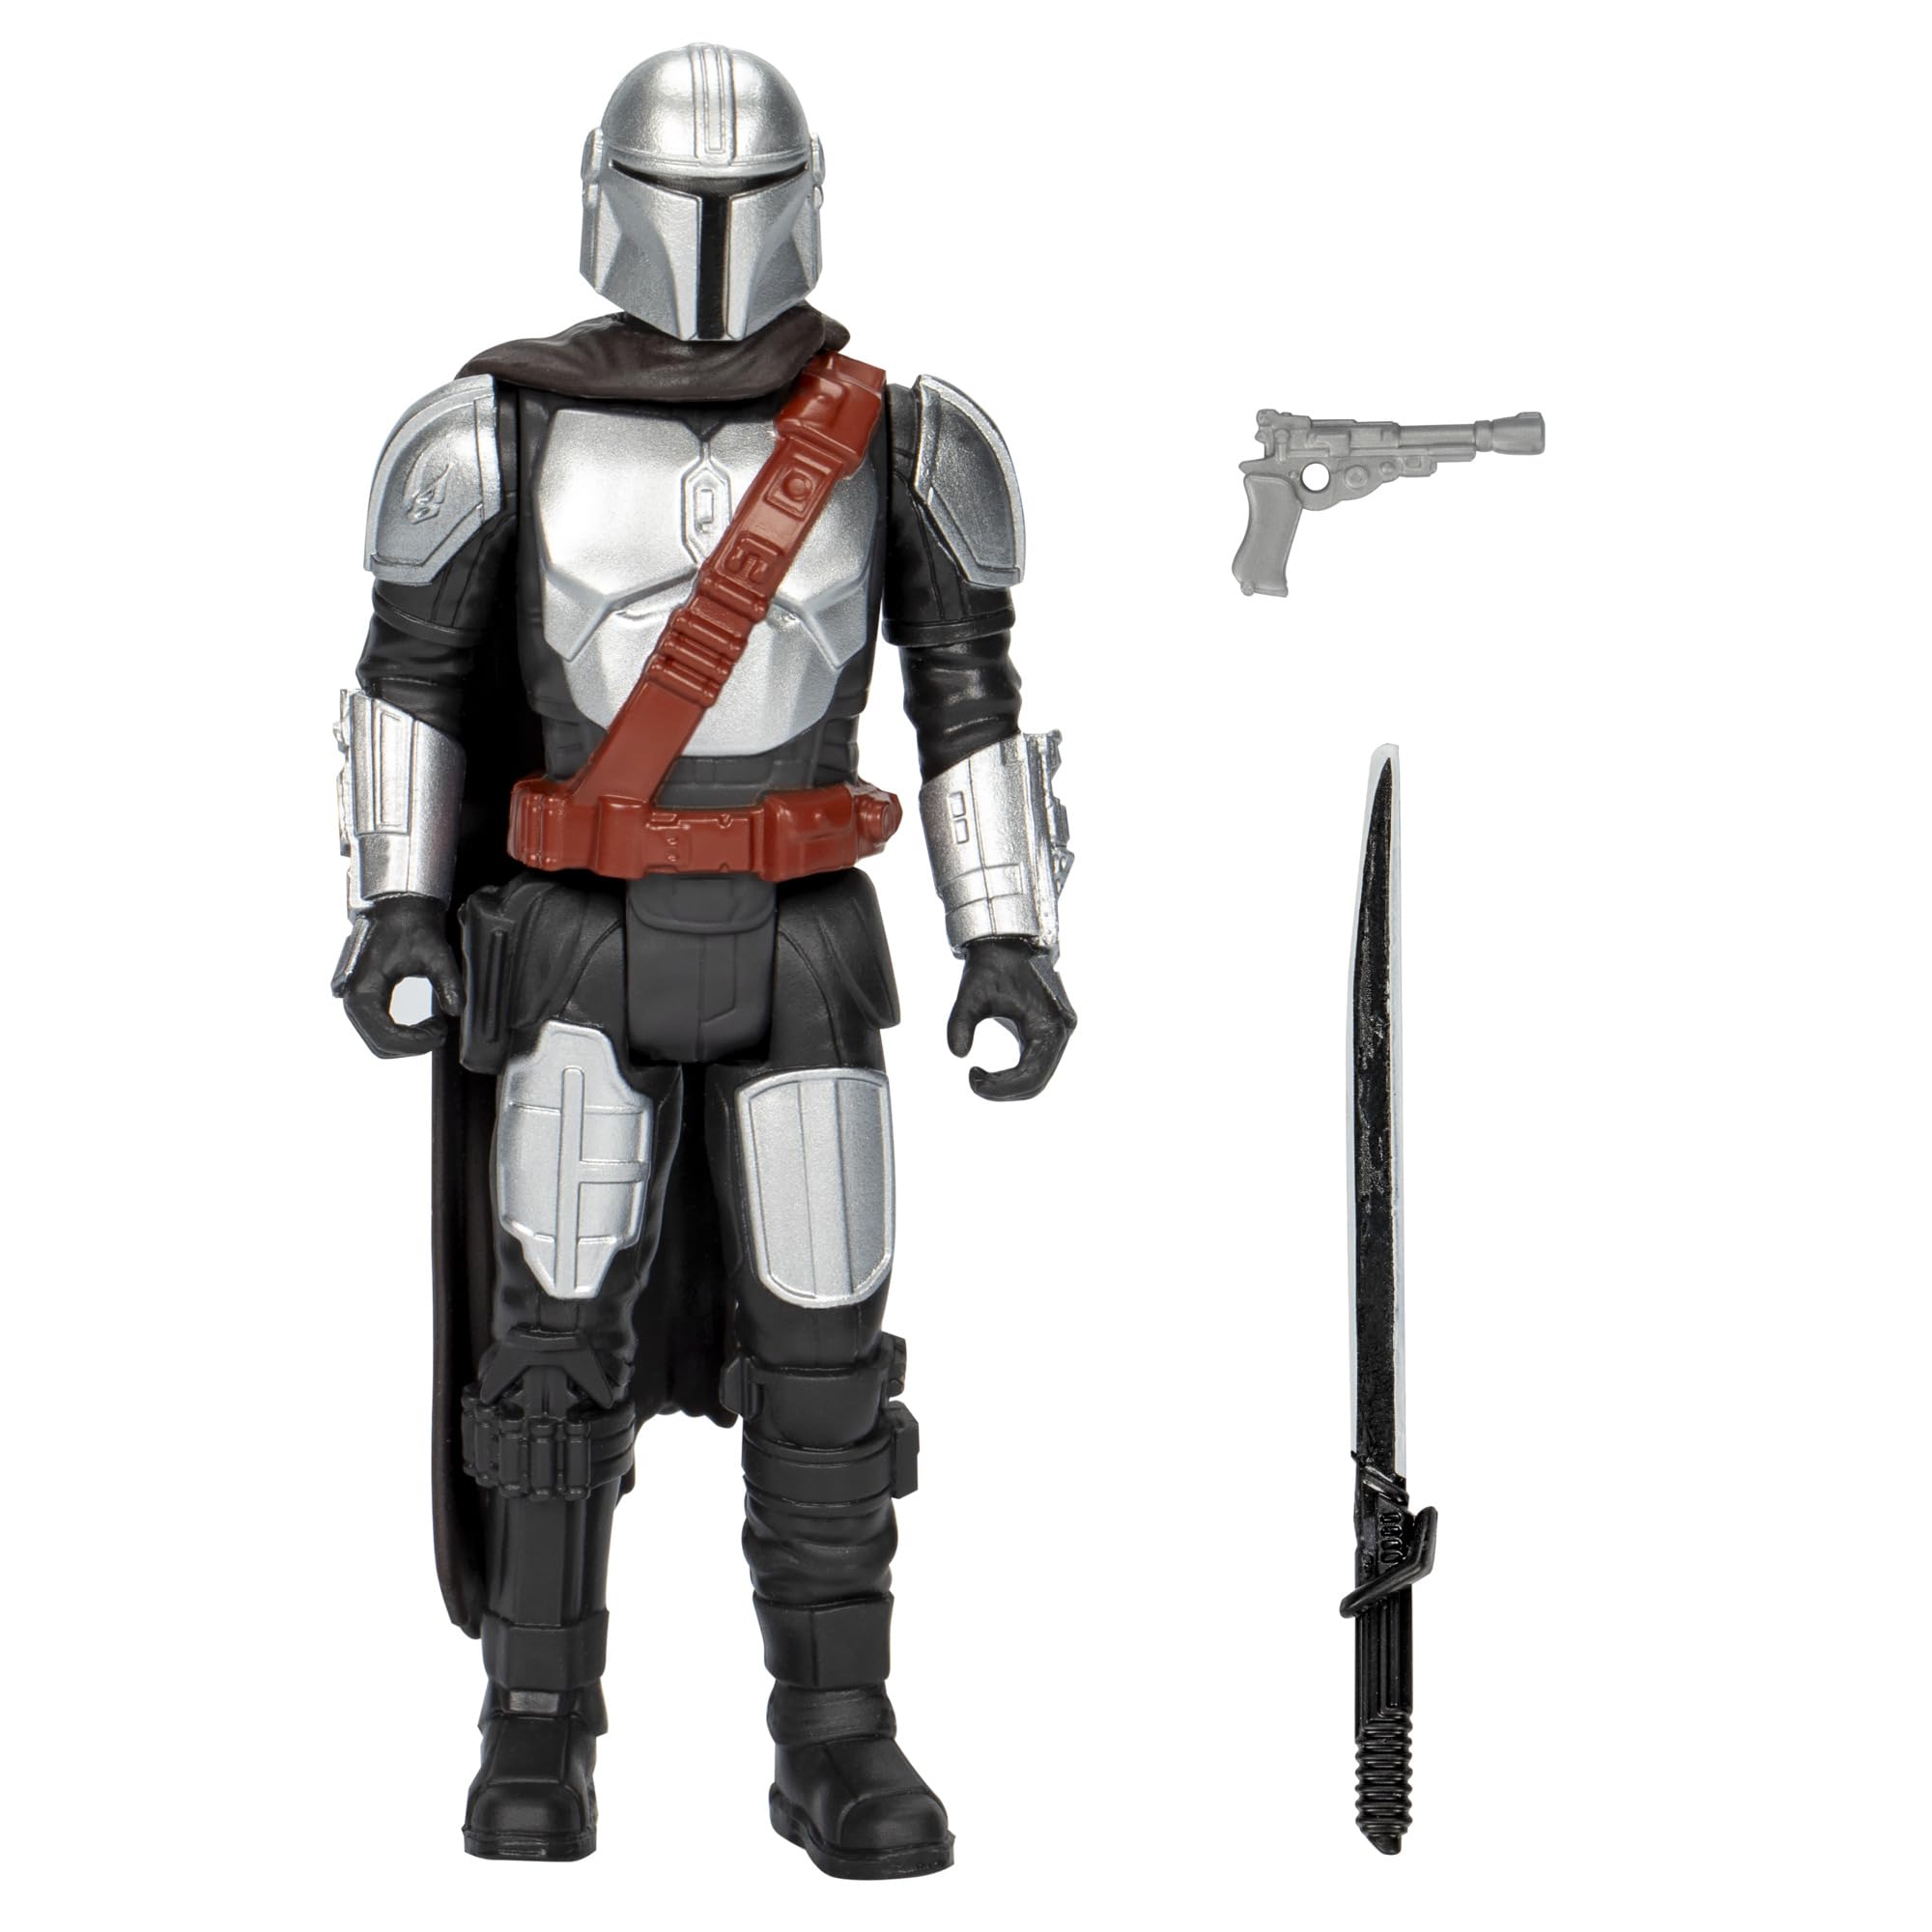 4" Star Wars Epic Hero Series The Mandalorian Action Figure w/ 2 Accessories $4.73 + Free Shipping w/ Prime or on orders over $35